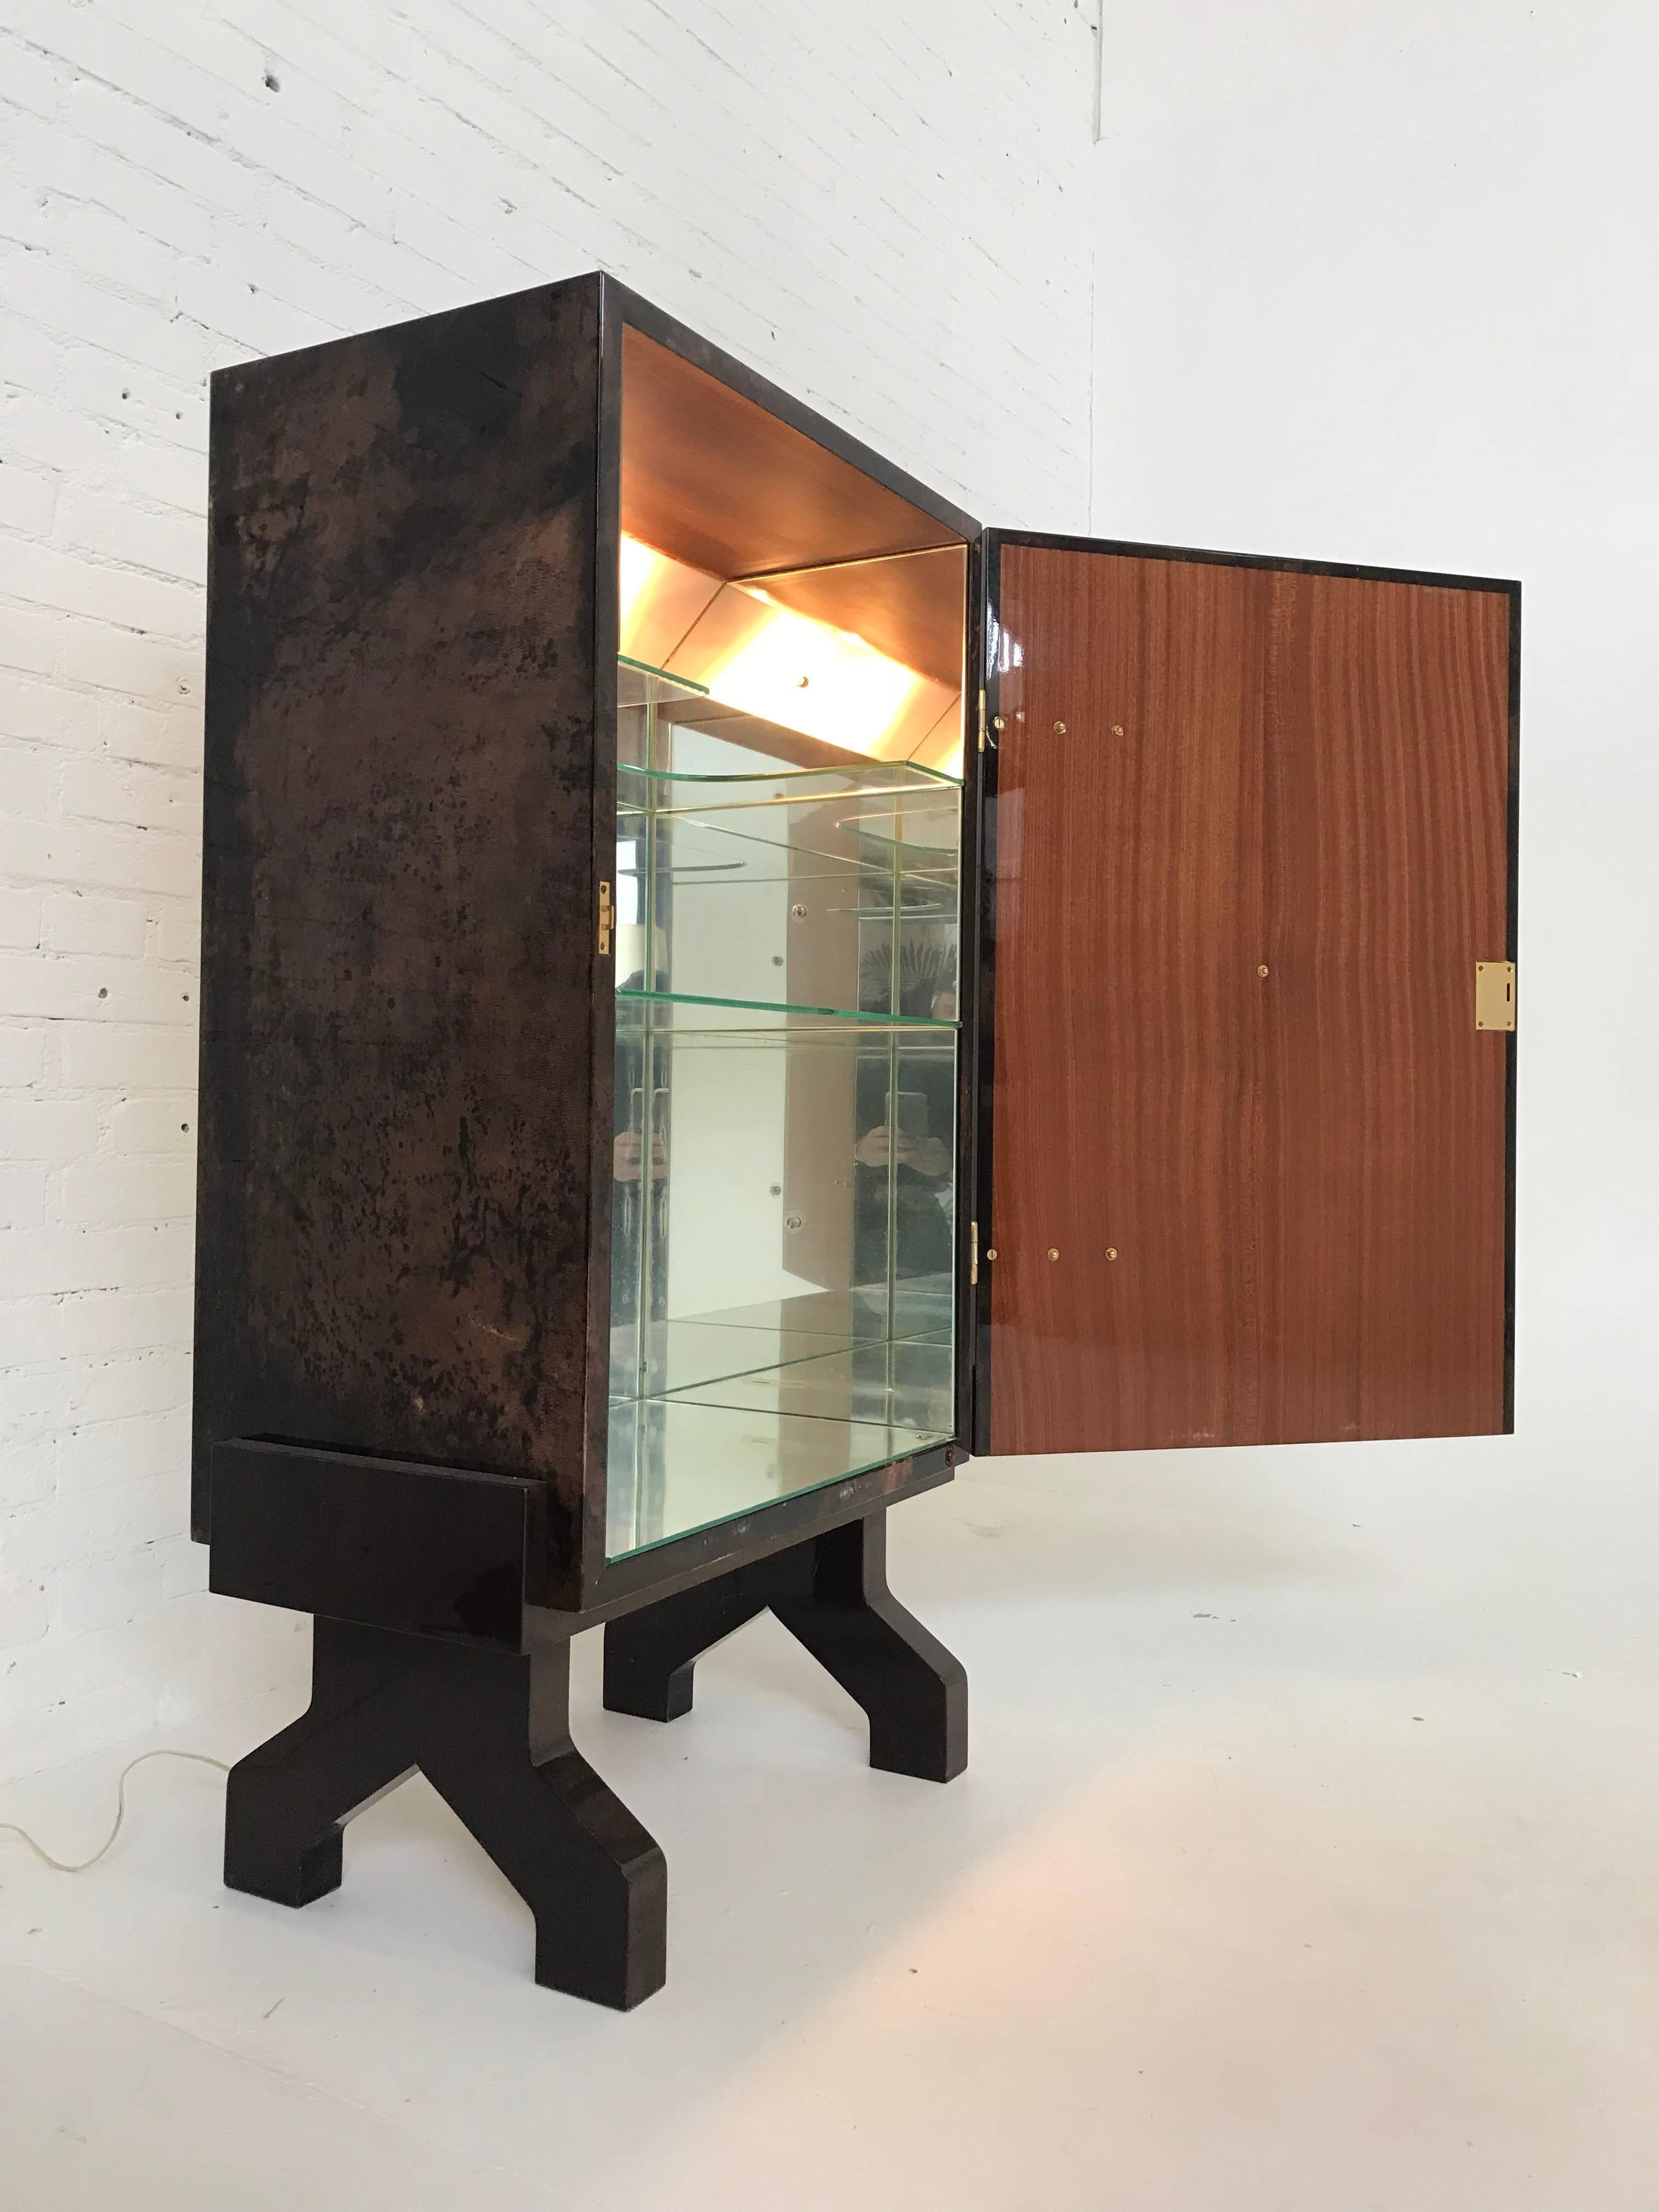 Two-door brown Goatskin dry-bar cabinet with brass studs and hardware on separate wood stand. Mirrored, lighted interior with glass shelves. Exceptional designer piece made in the 1960s.